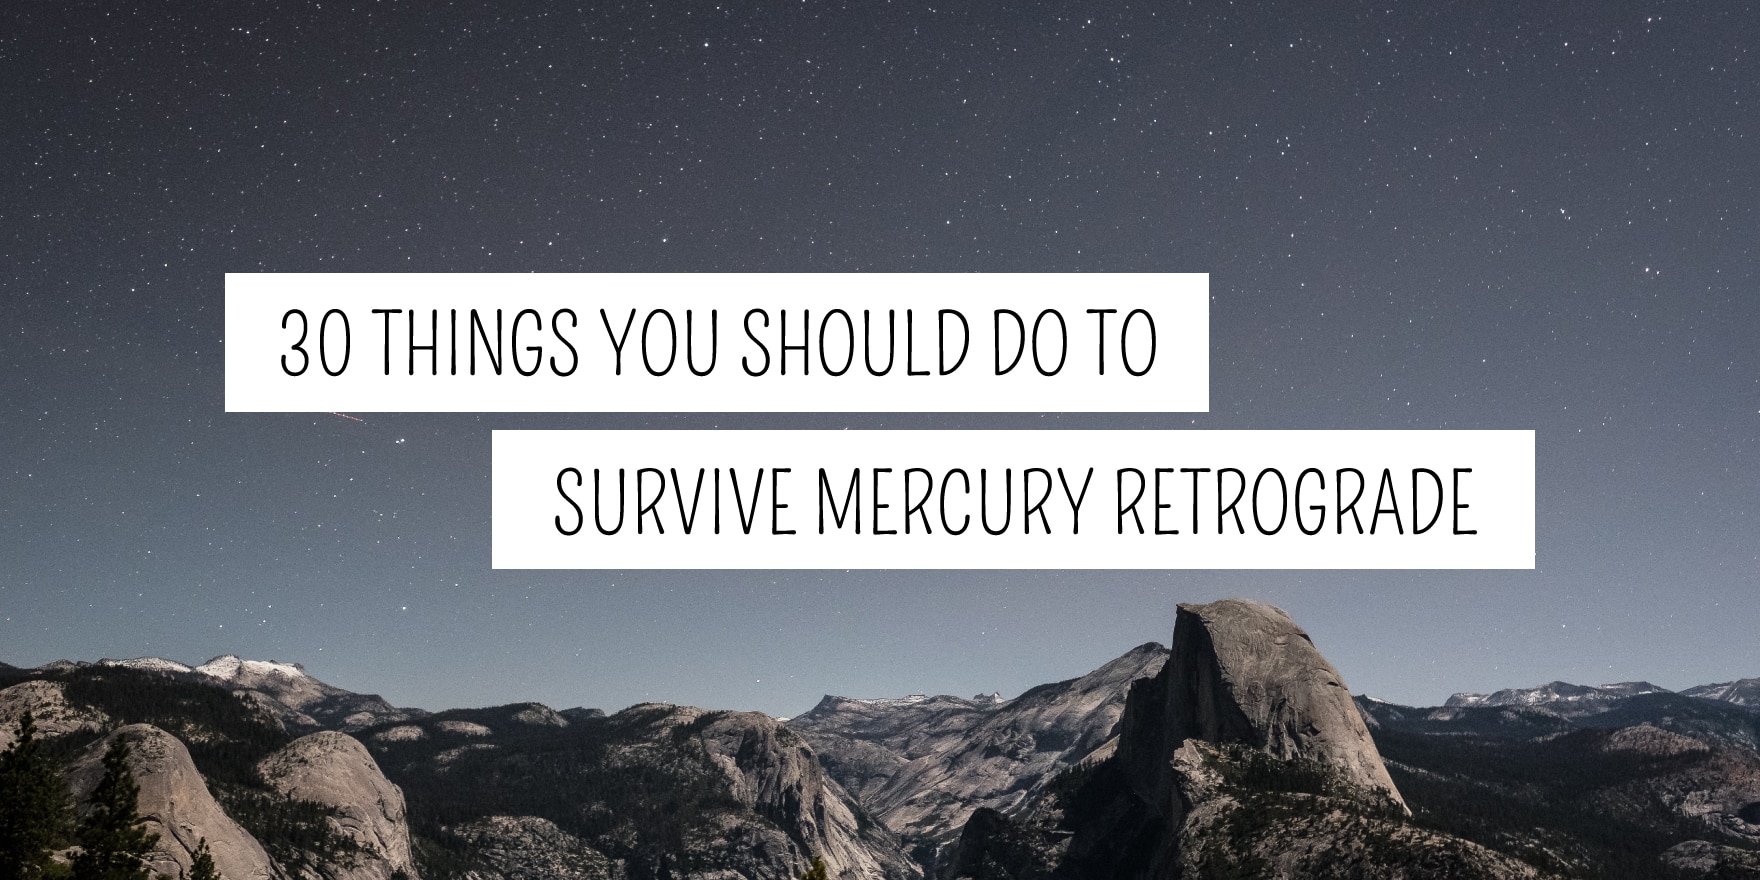 A tranquil night sky over a mountainous landscape with an overlay text: "30 things you should do to survive Mercury retrograde," available at your favorite metaphysical shop.